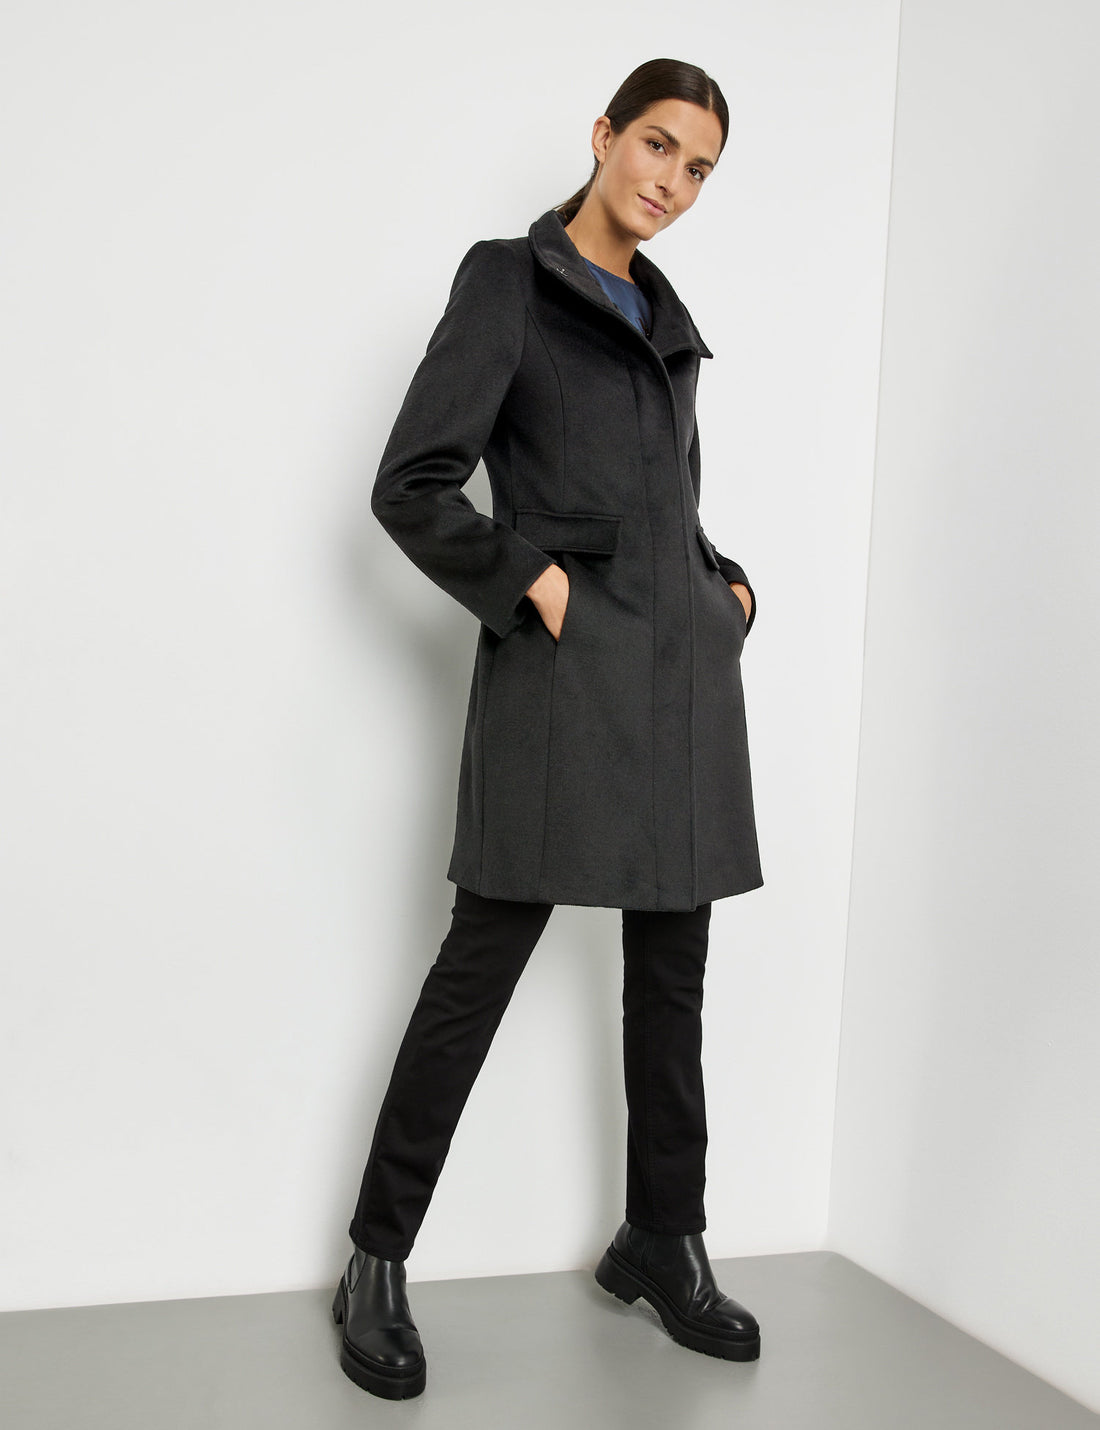 Short Wool Coat With A Stand Up Collar_250235-31131_11000_01